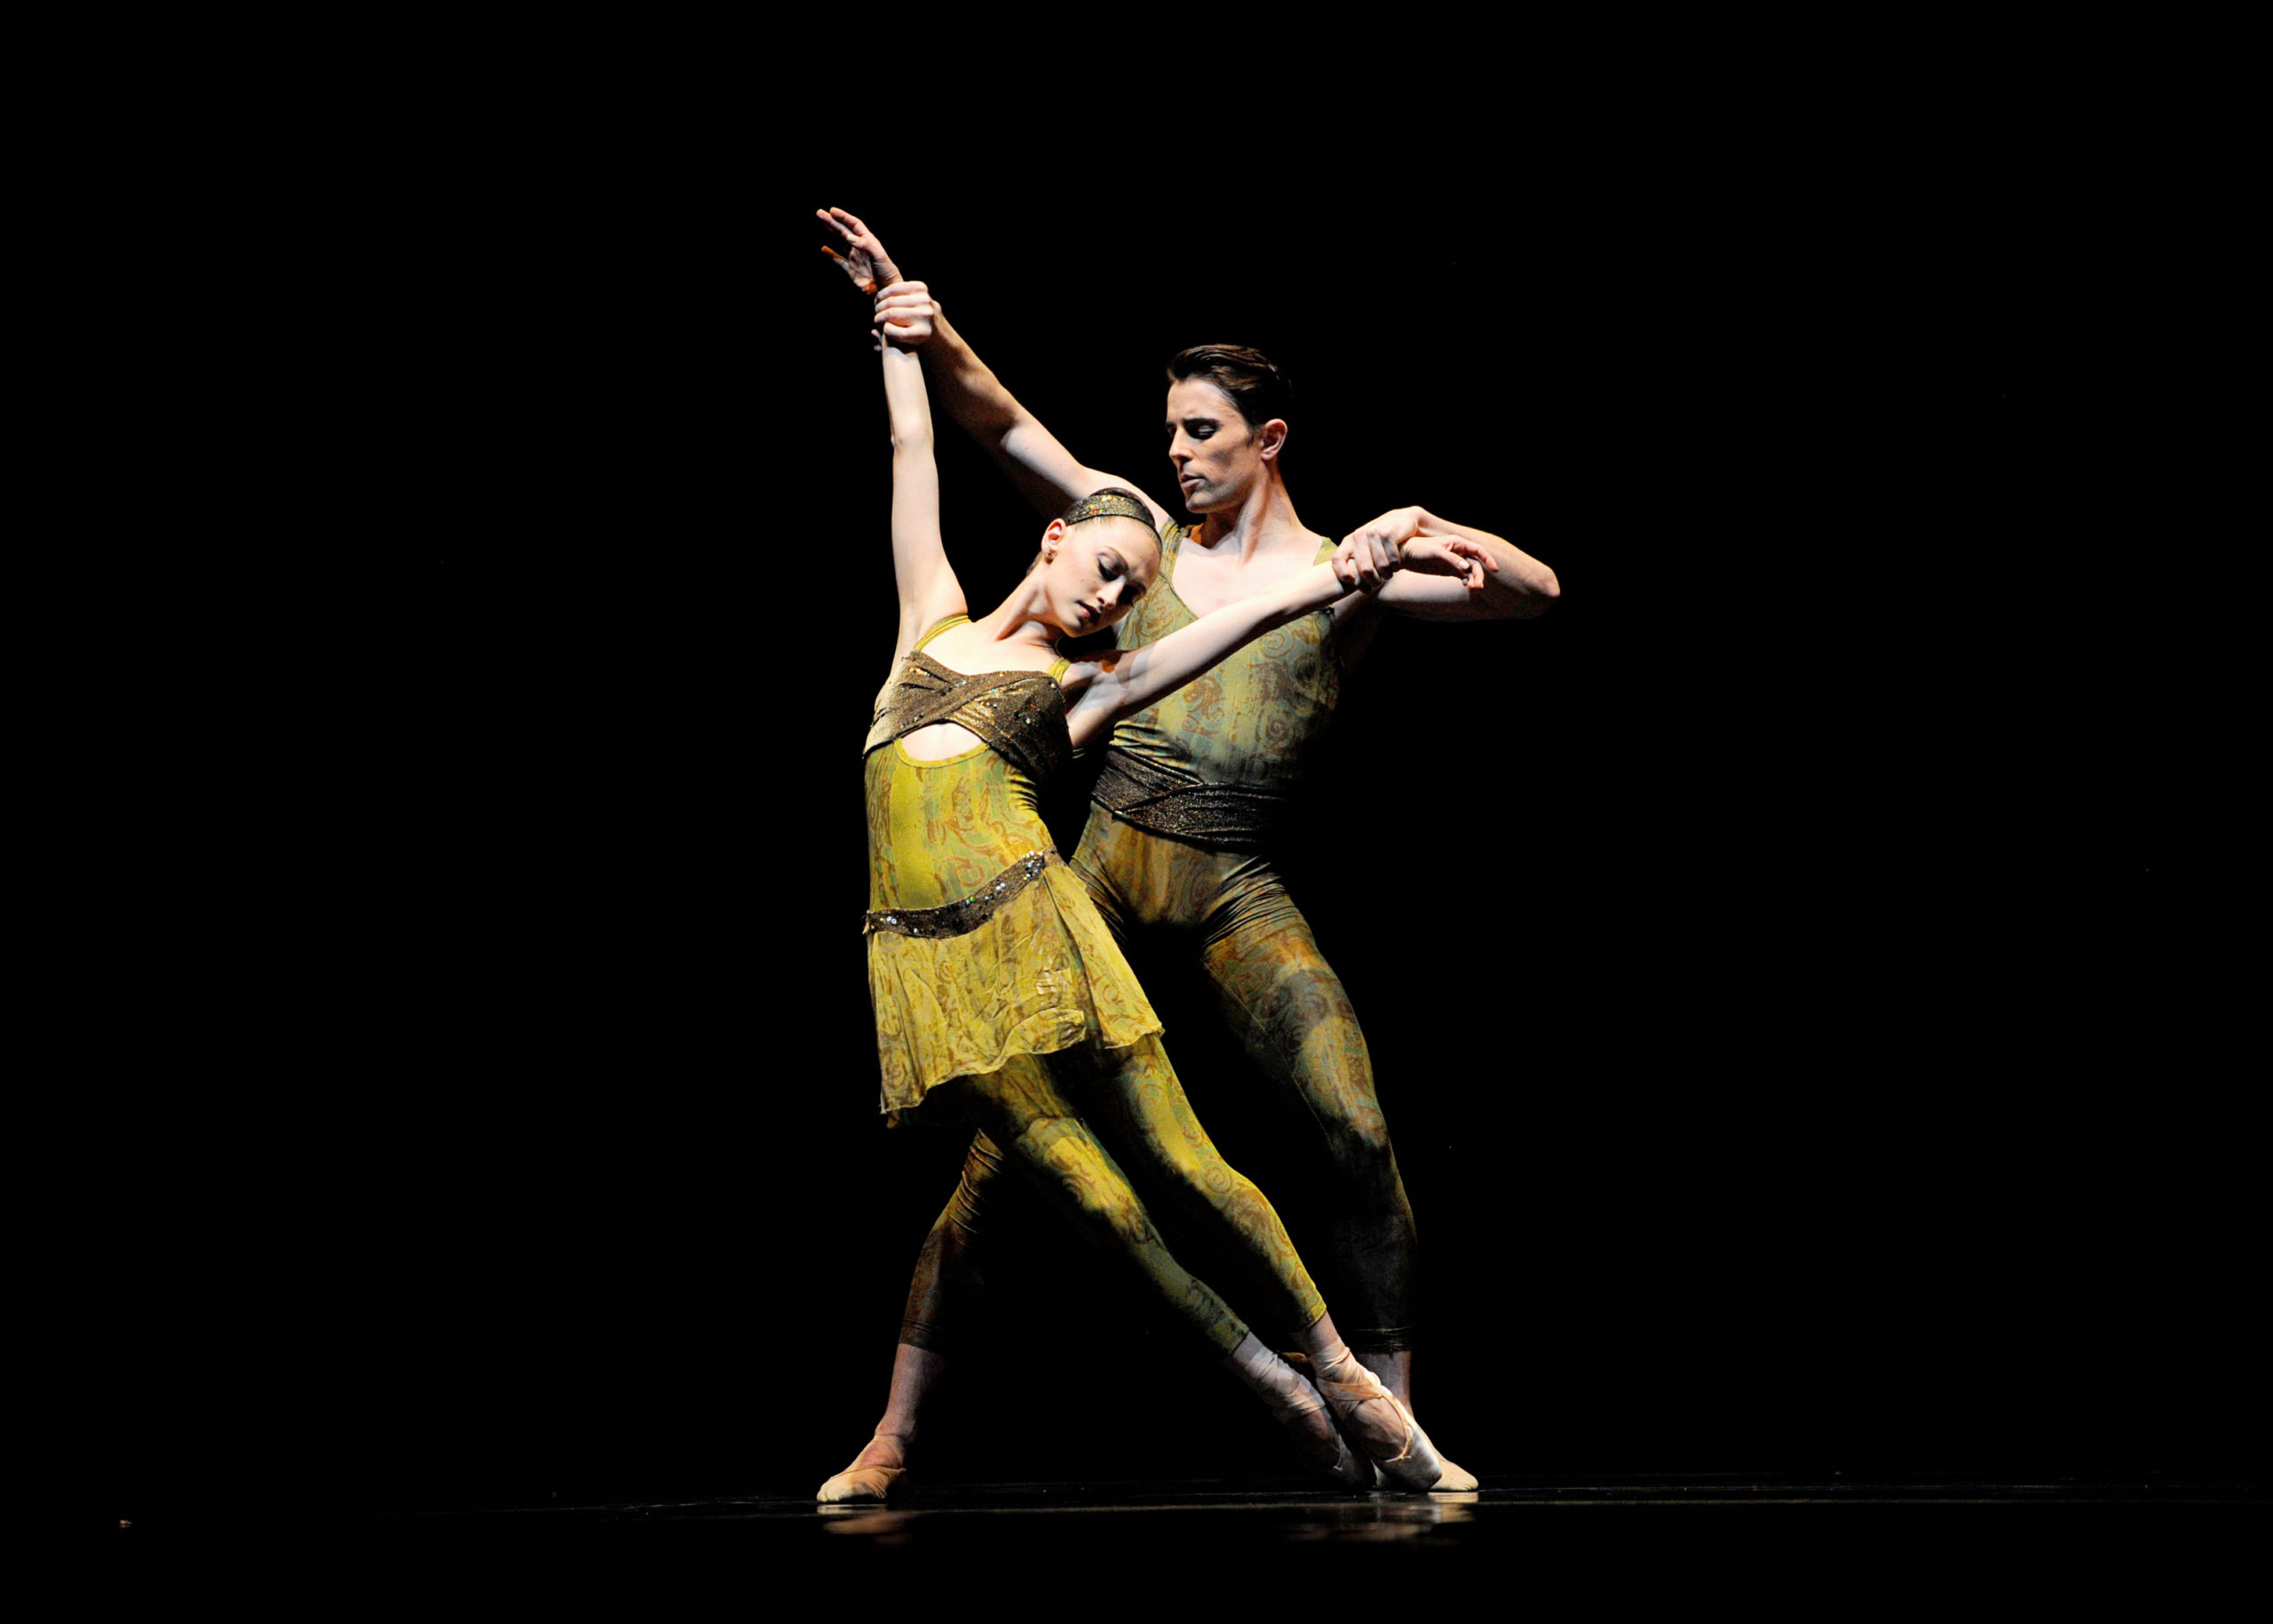 Sarah Van Pattan stands in parallel on pointe and leans to her right as Luke Ingham stands behind her and pulls her arms up. They both wear green costumes with a brown vertical pattern.